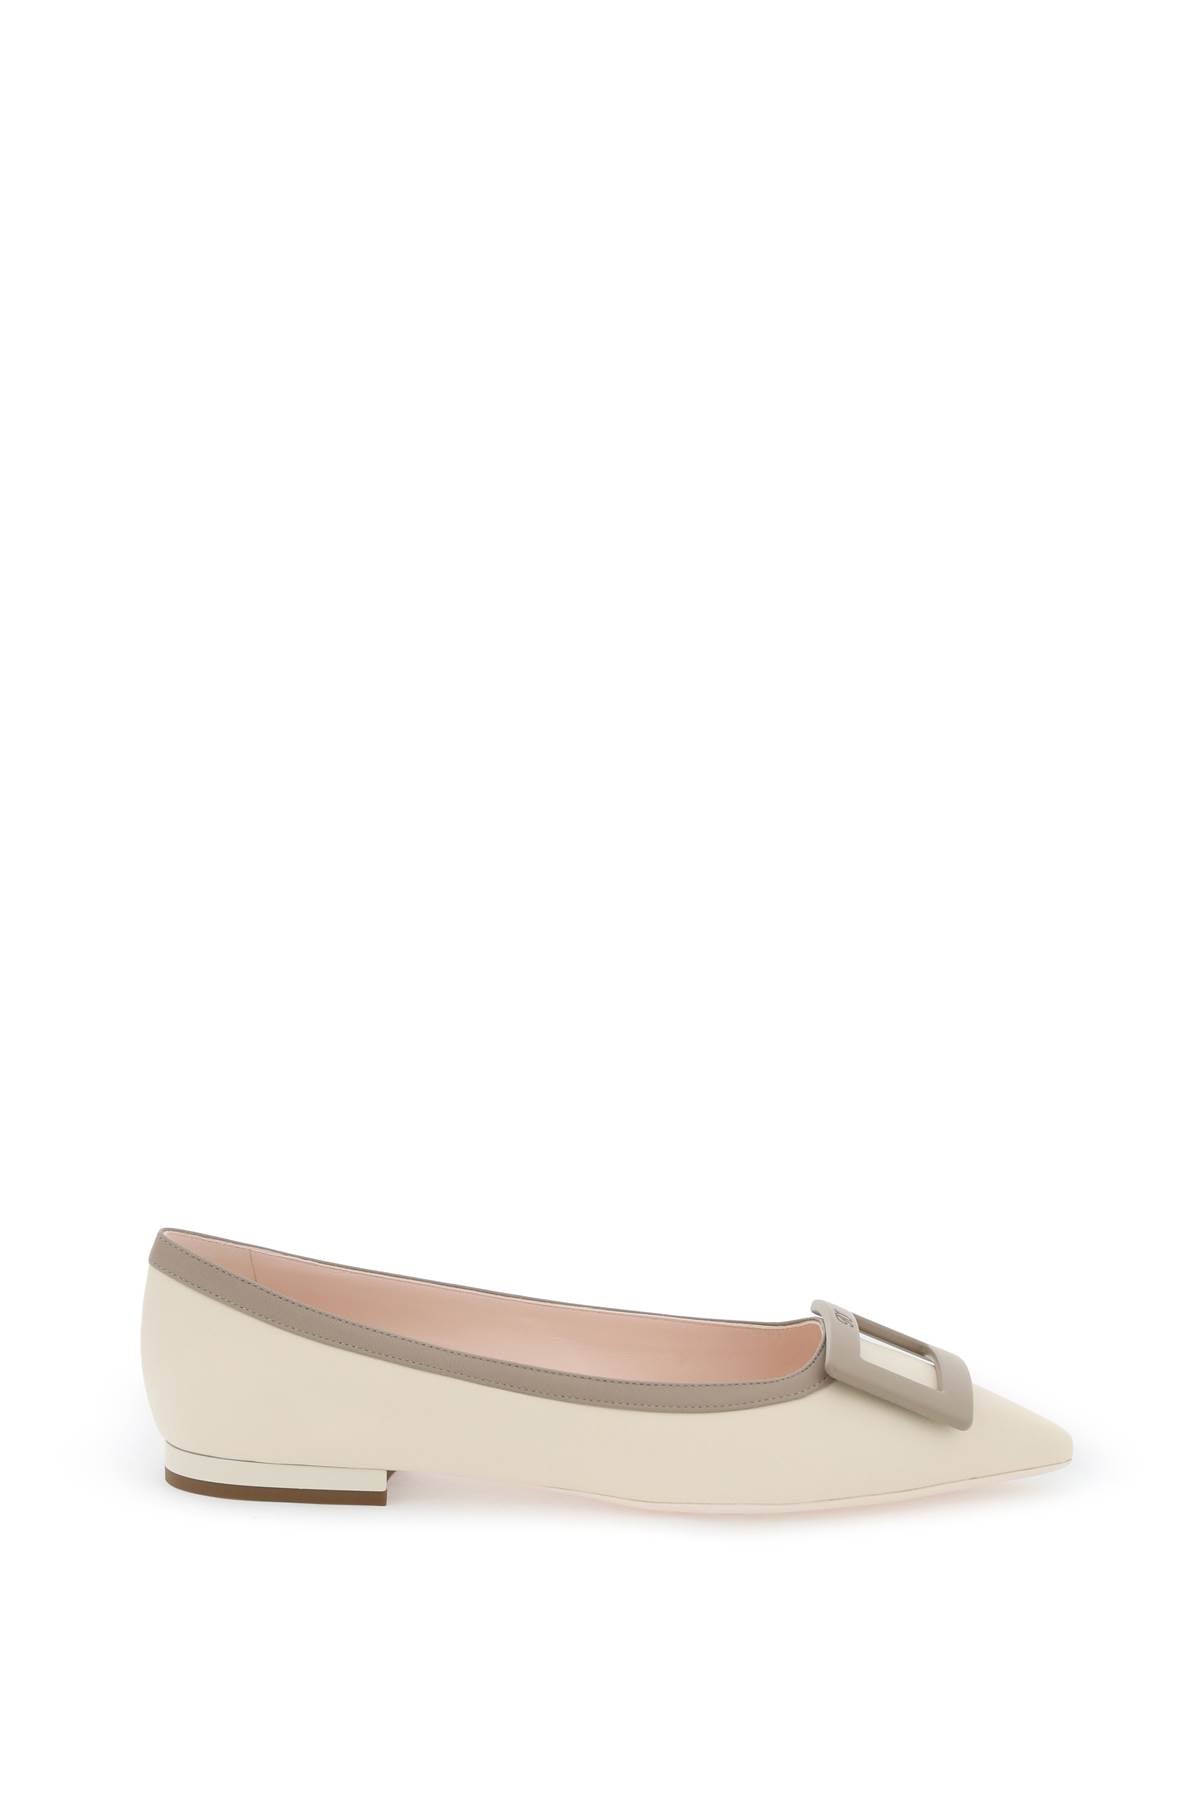 ROGER VIVIER Neutral Leather Ballerina Flats with Iconic Buckle for Women